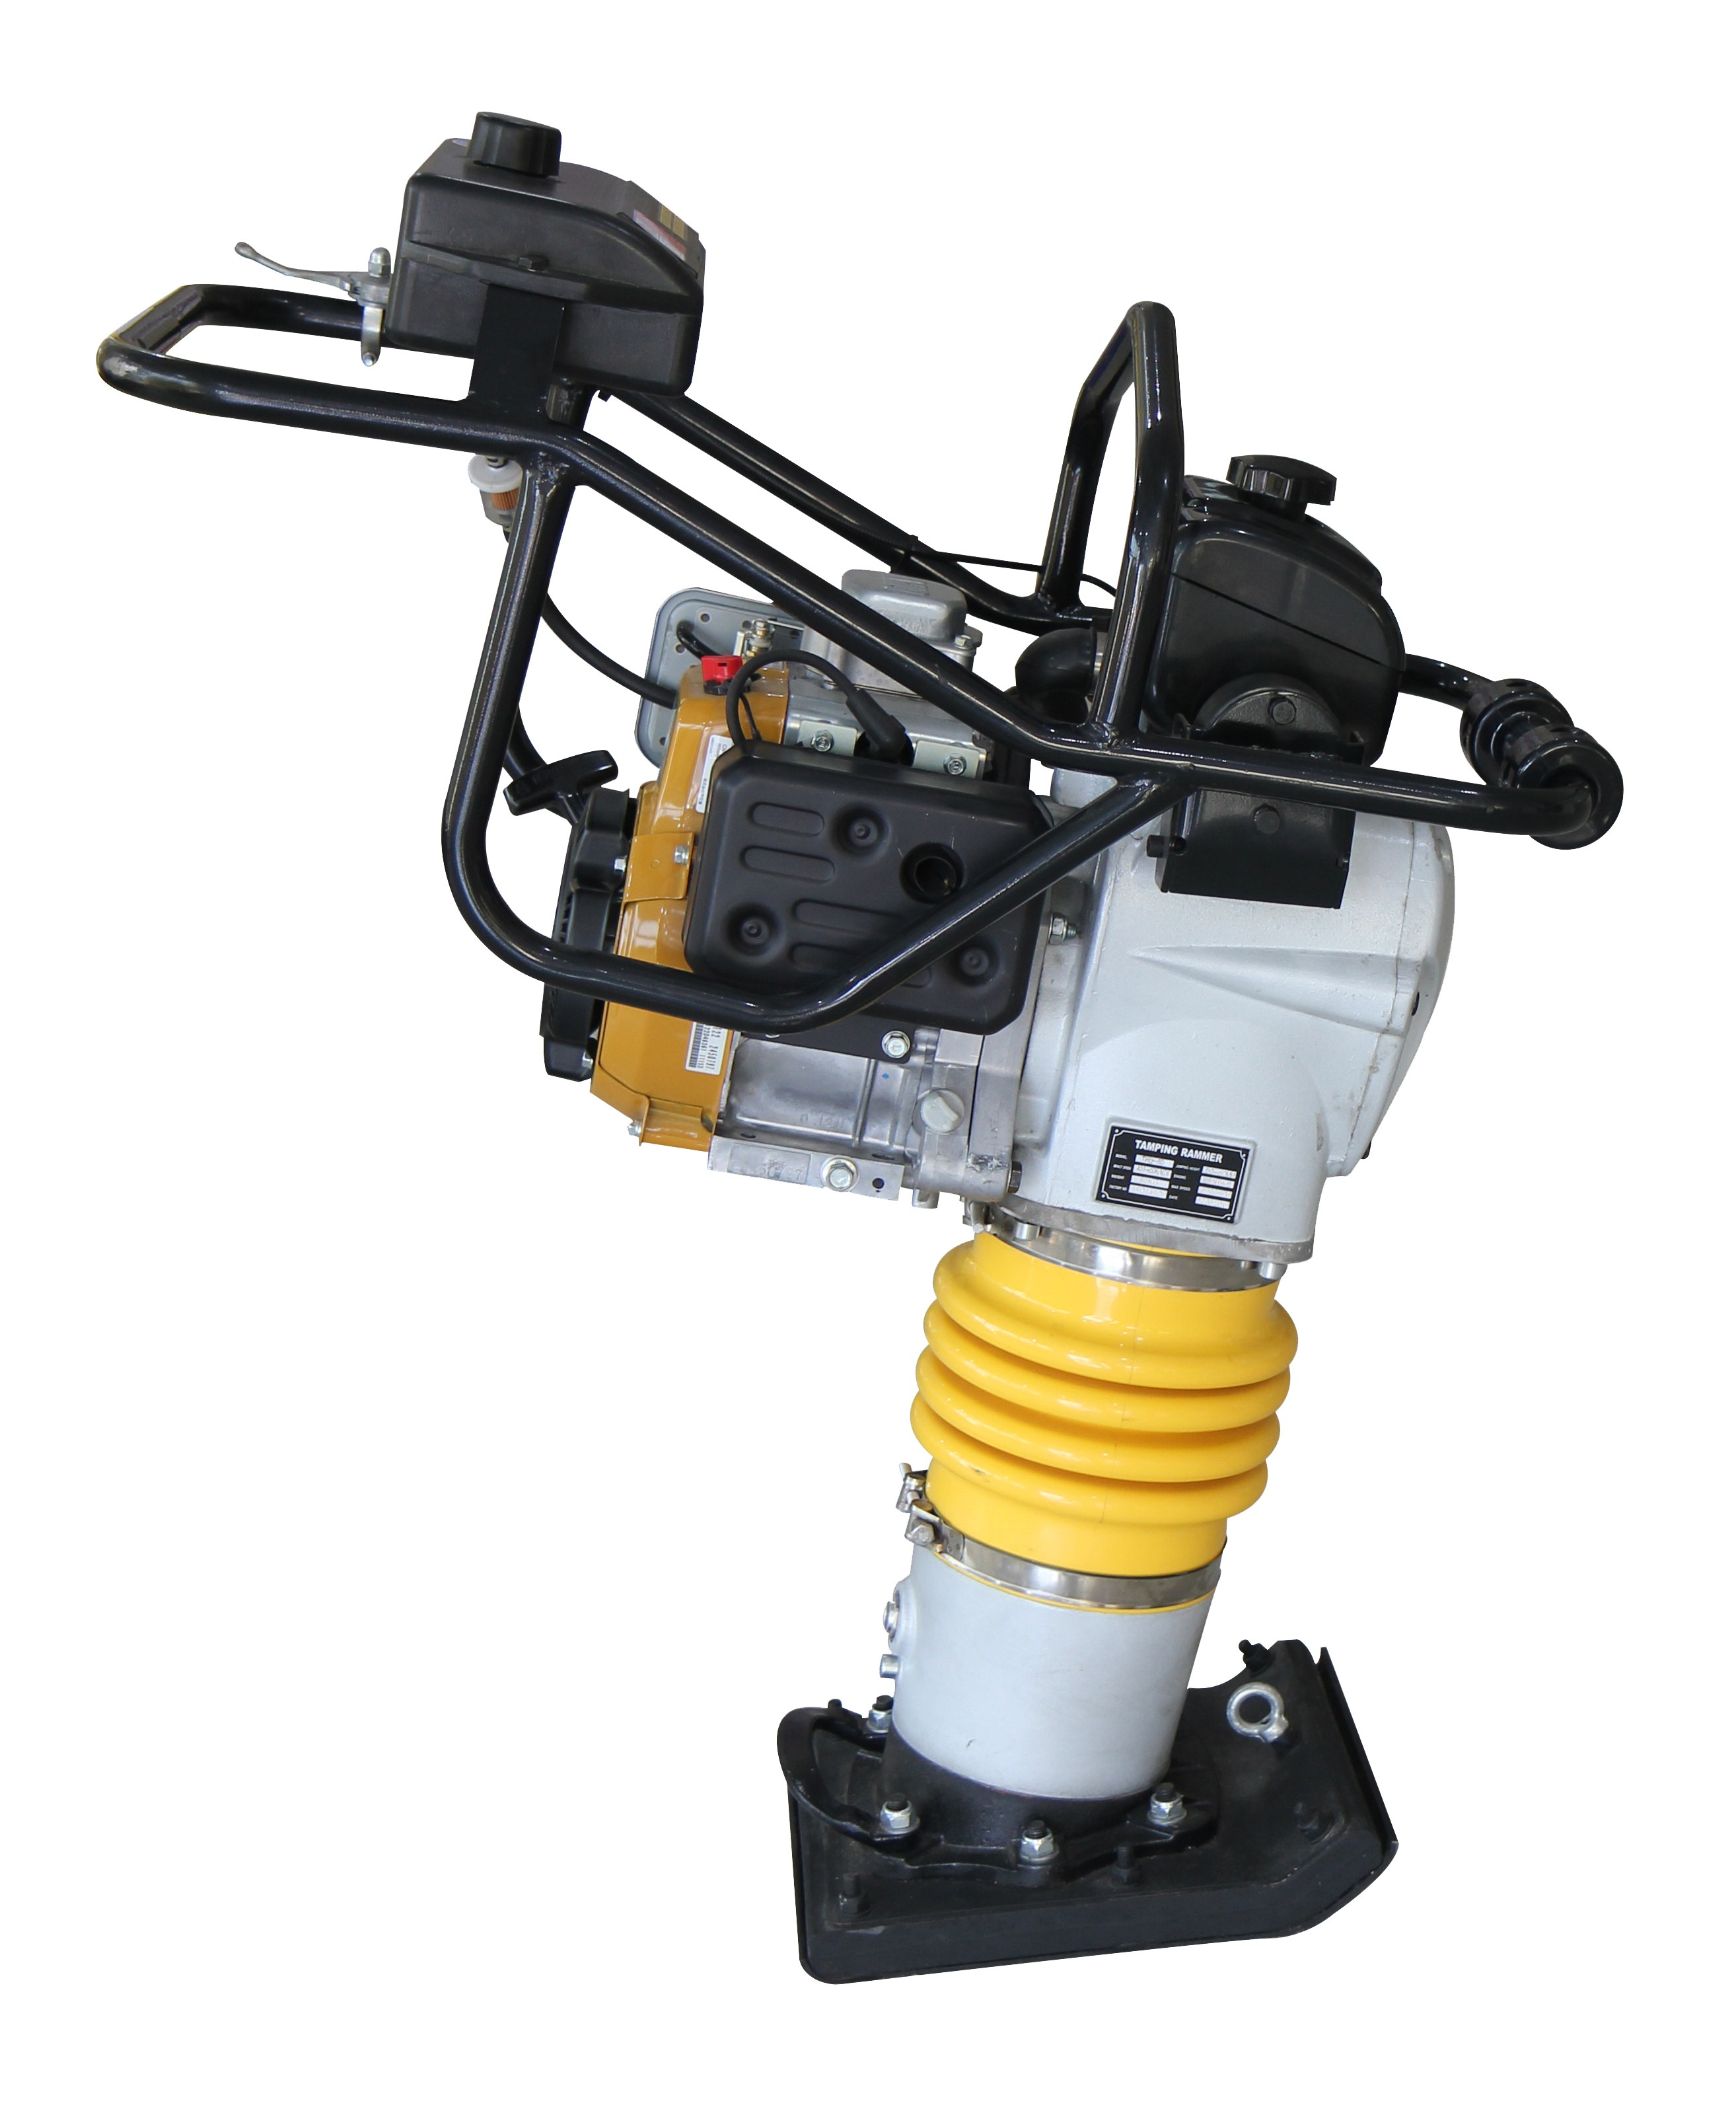 DYNAMIC soil GX-120 tamping rammer manufacturer with the best spare parts